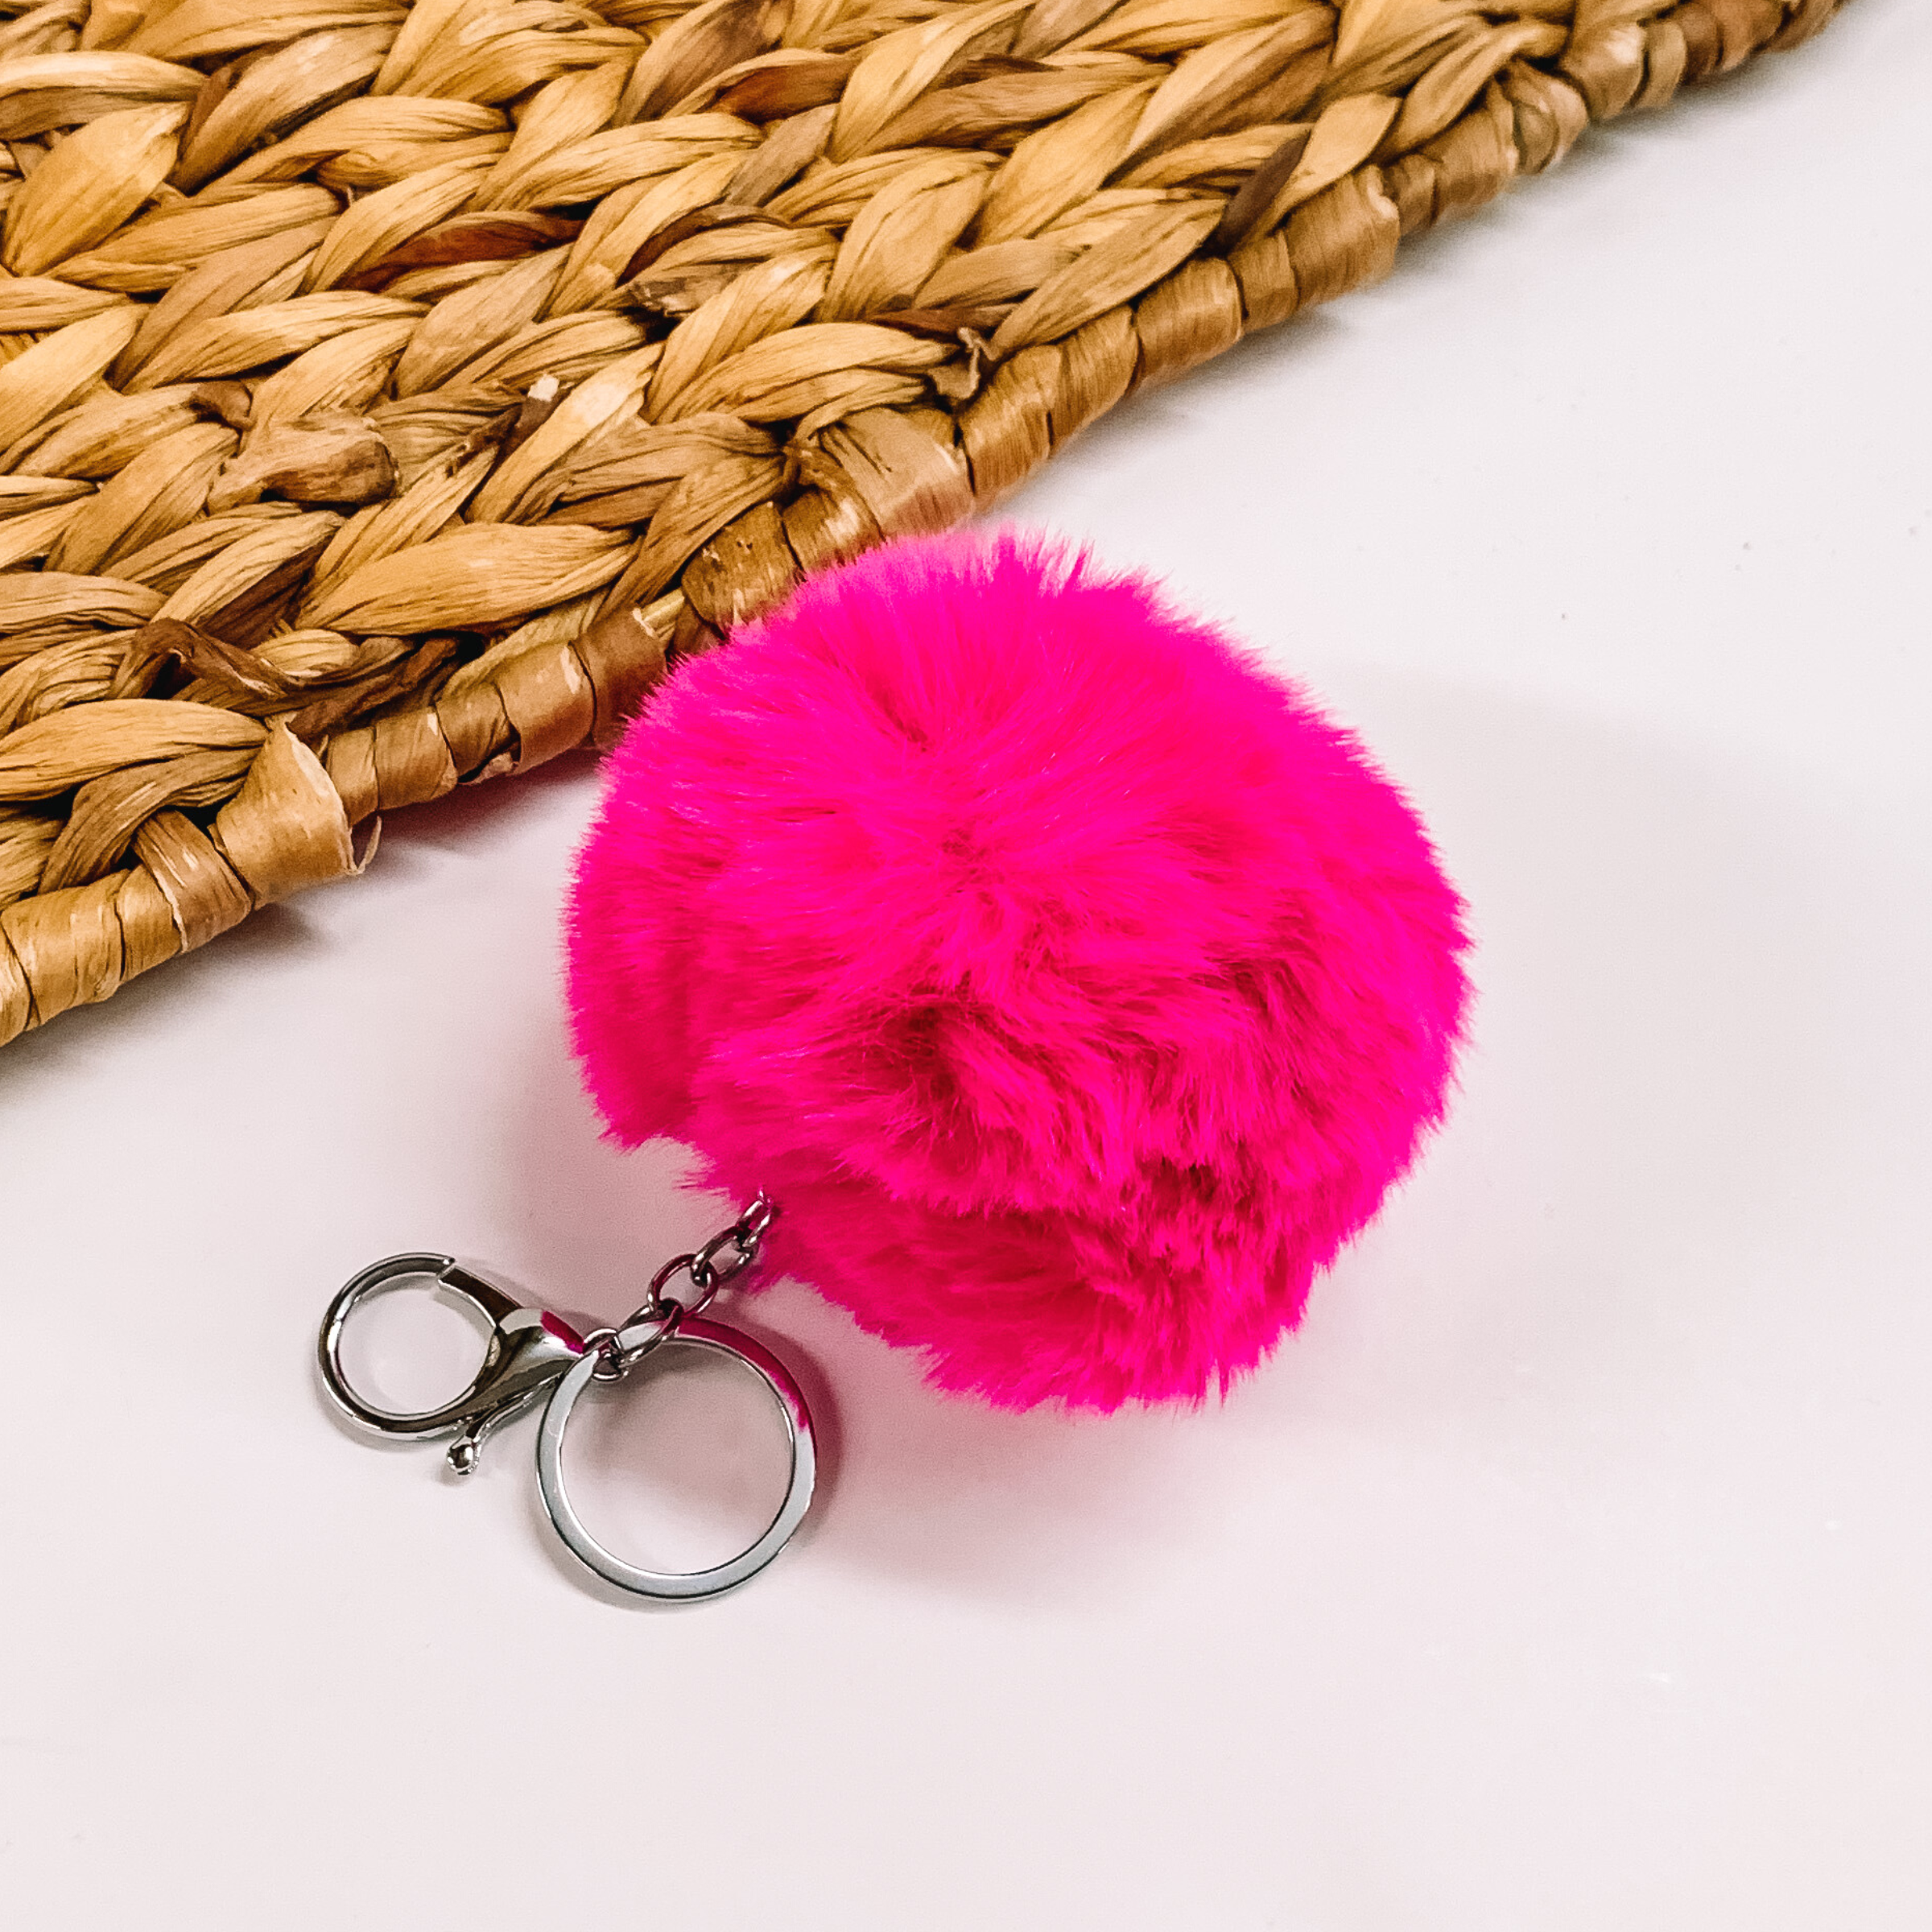 Buy 3 for $10 | Large Puff Ball Keychains - Giddy Up Glamour Boutique